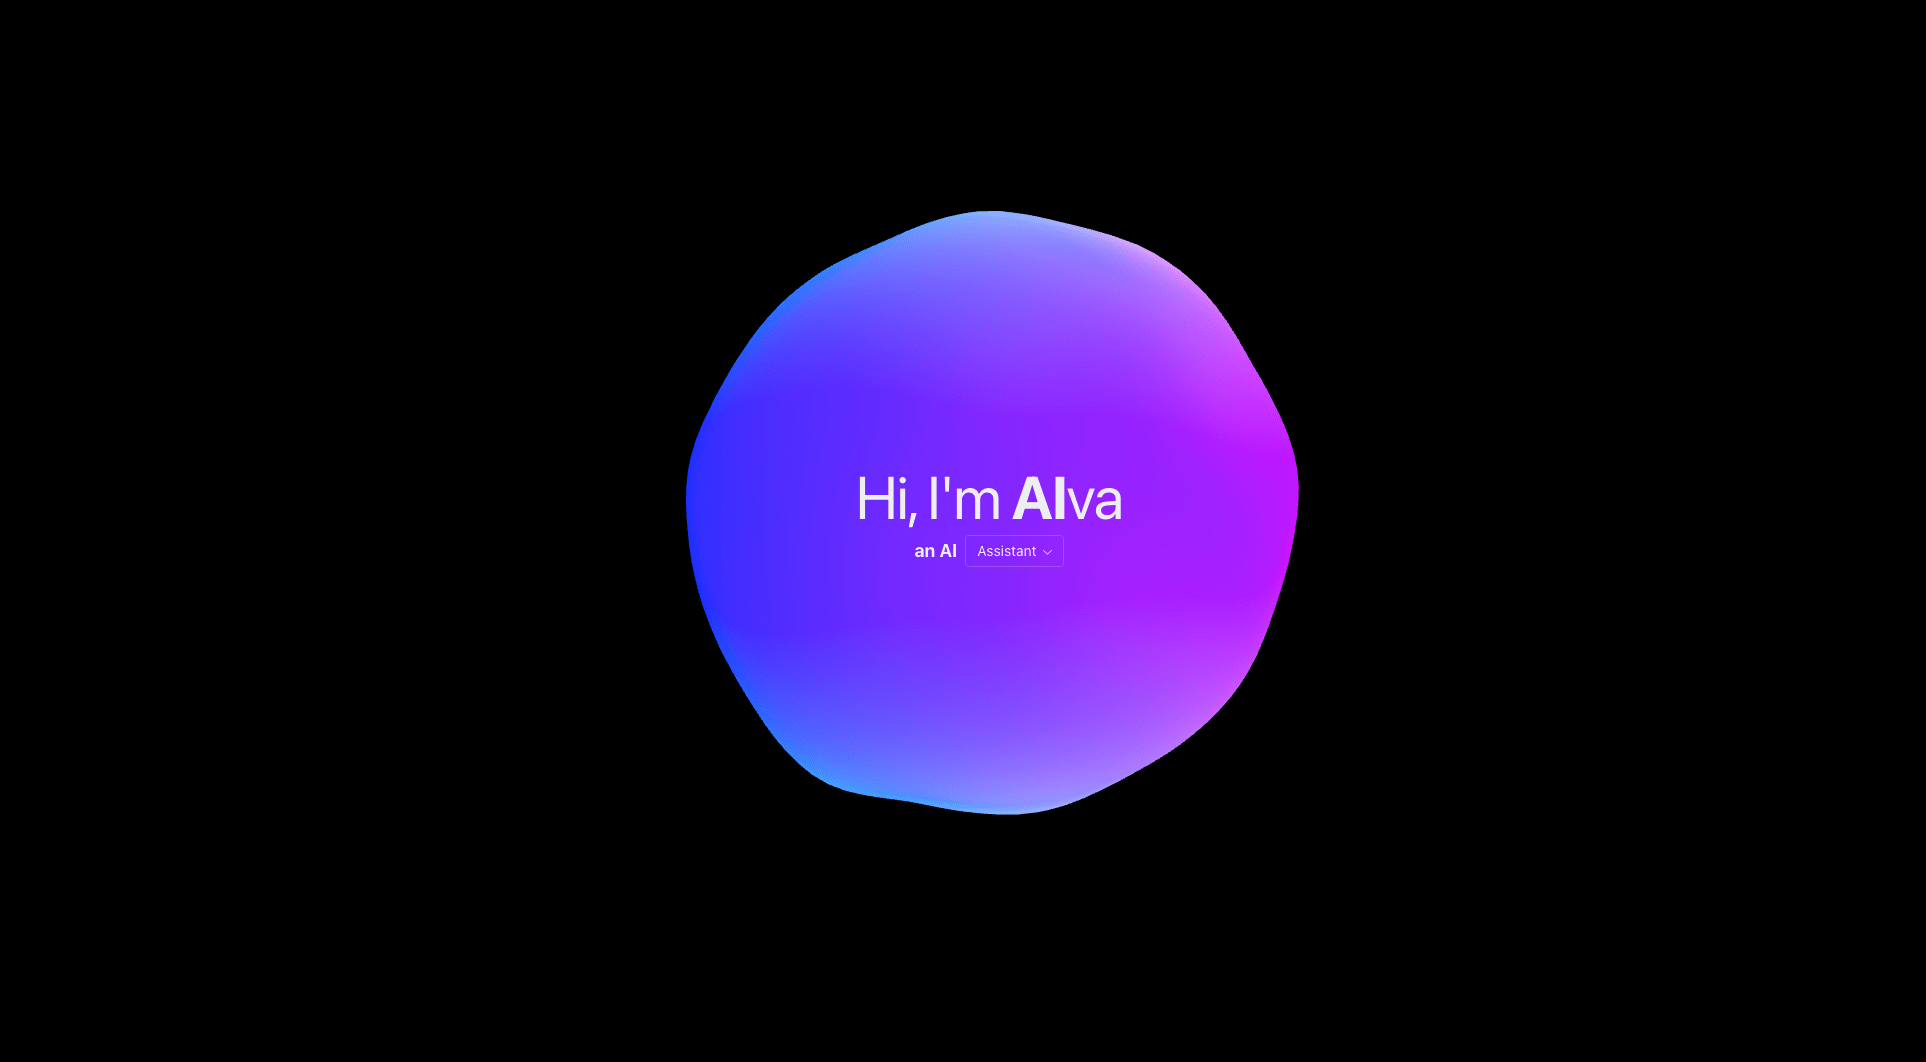 /img/articles/interacting-with-chat-gpt-through-voice-ui-on-the-web-aiva.png